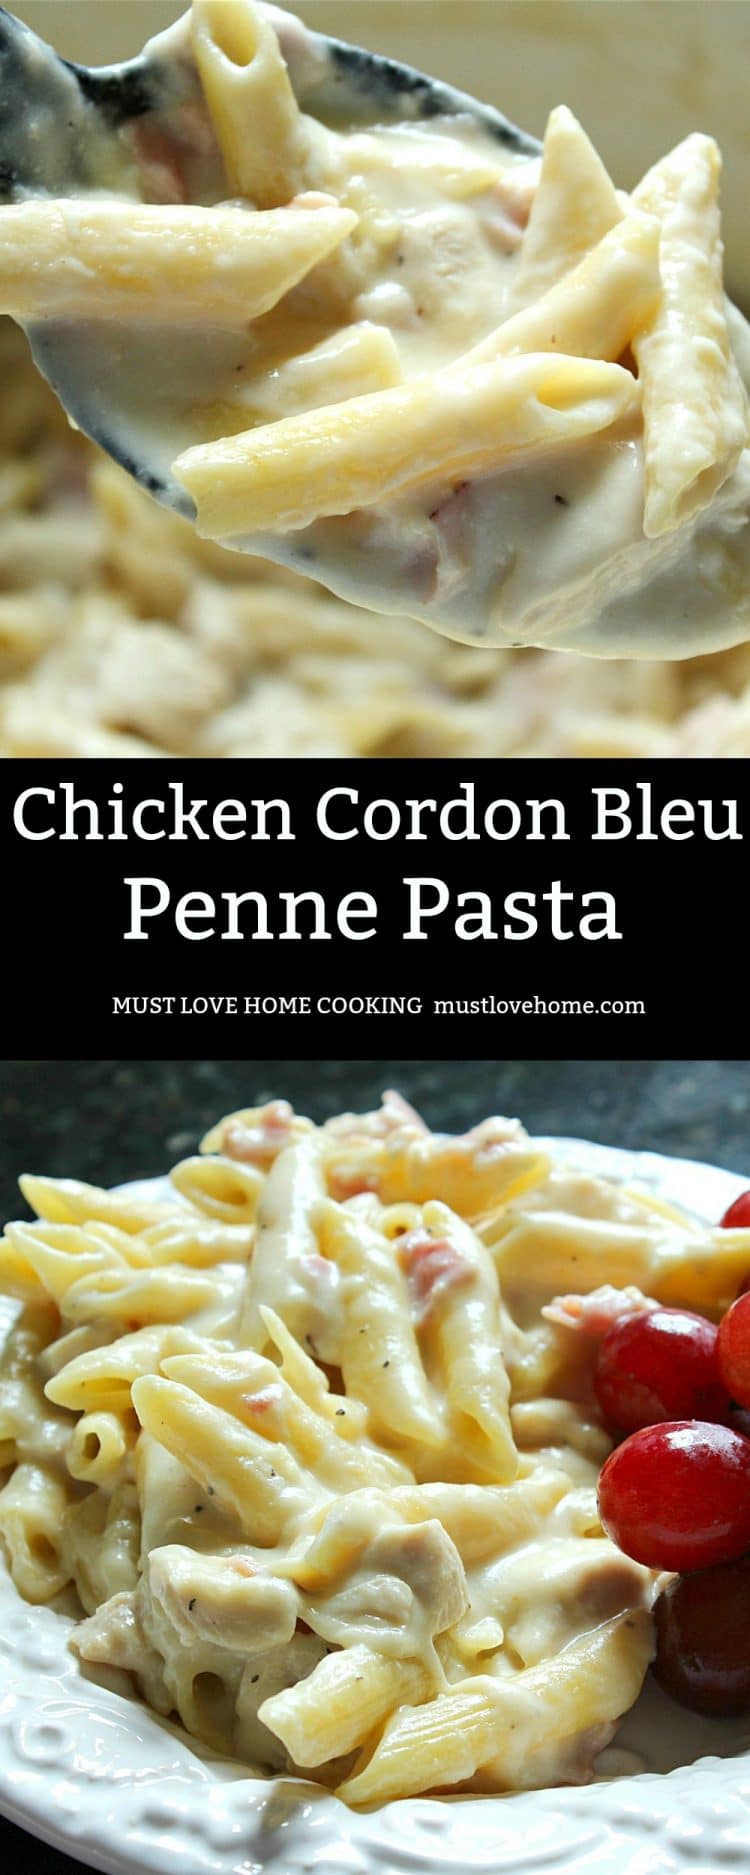 Chicken Cordon Bleu Penne Pasta is a delicious take on the old French Classic!